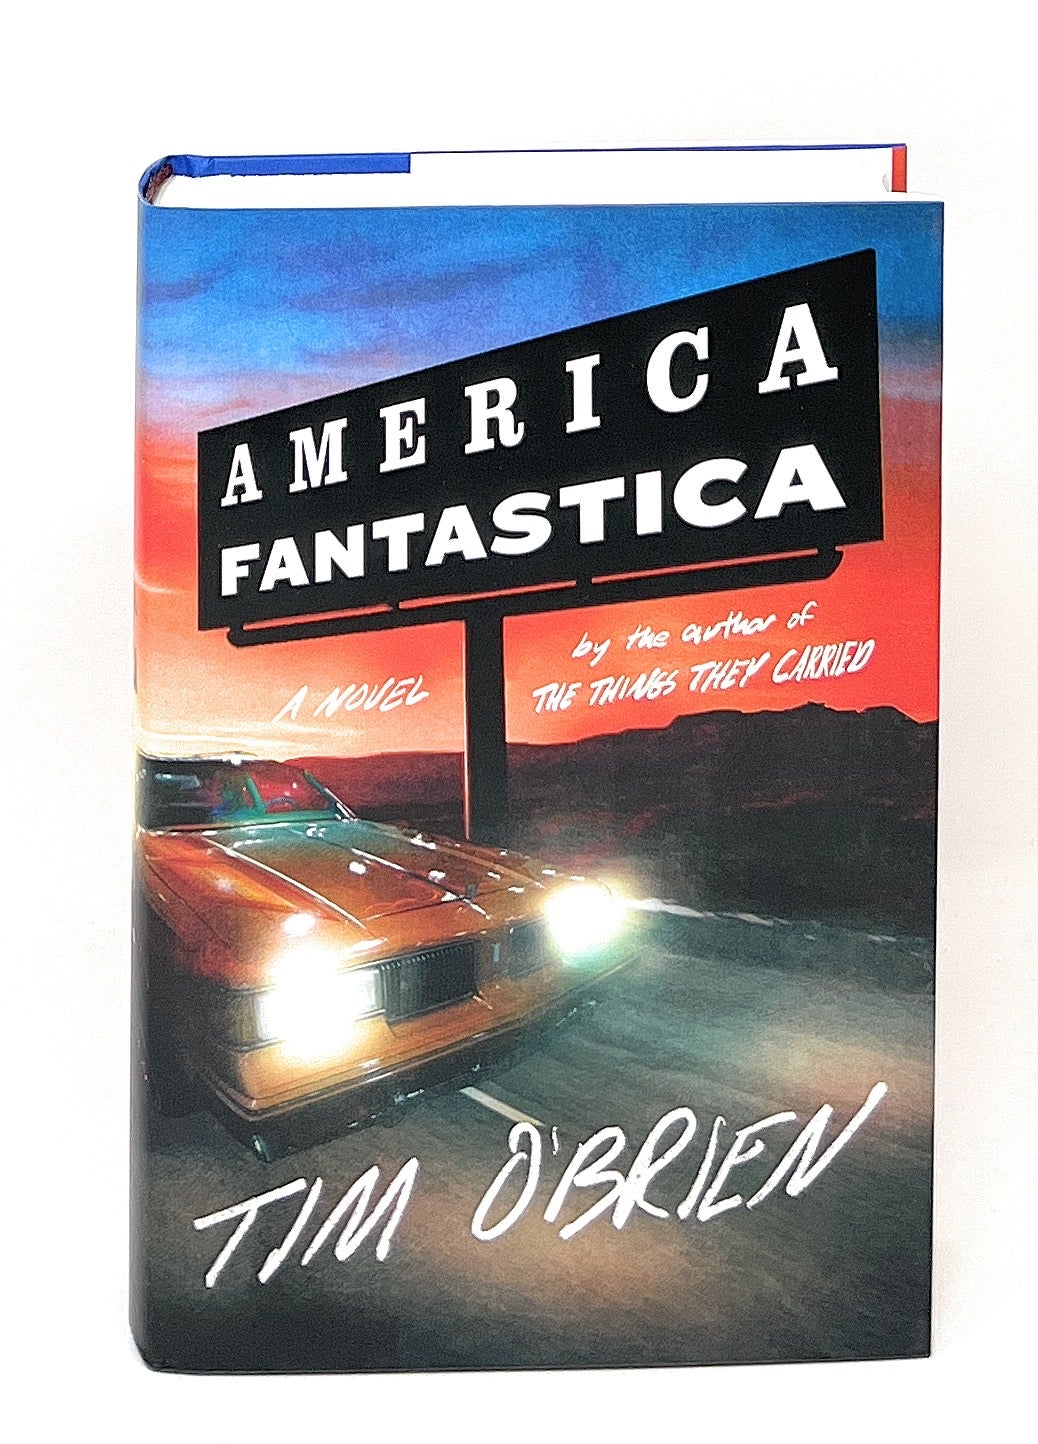 America Fantastica SIGNED FIRST EDITION by Tim O'Brien on Underground Books